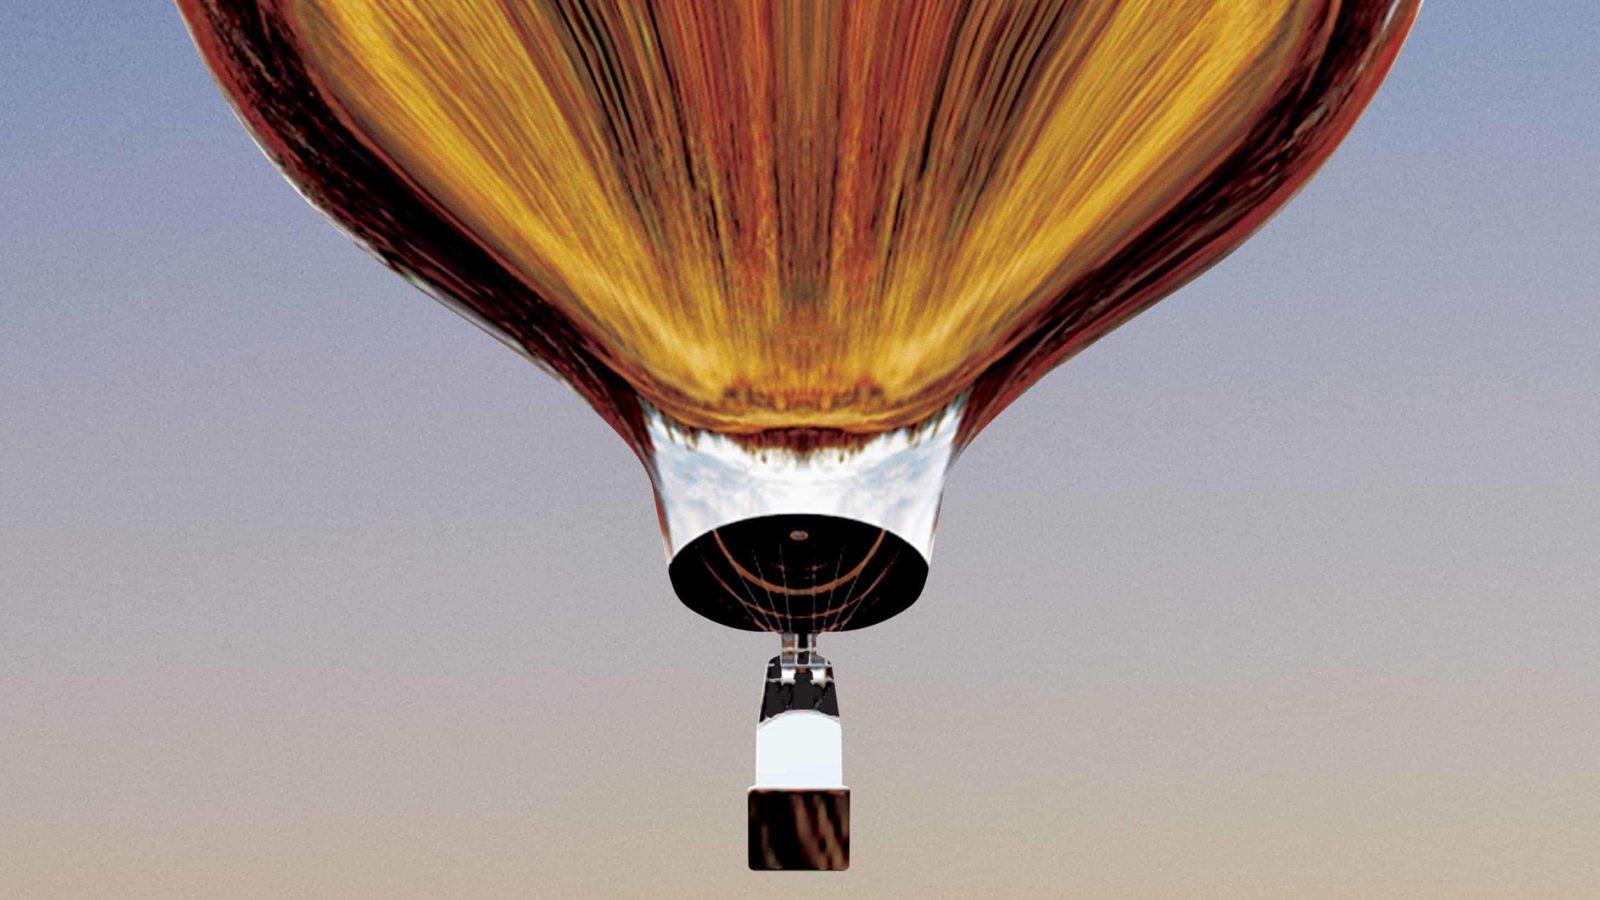 Internationally acclaimed installation artist Doug Aitken will set a mirrored hot air balloon flying across the state in New Horizon, a traveling art installation with the Trustees of Reservations.